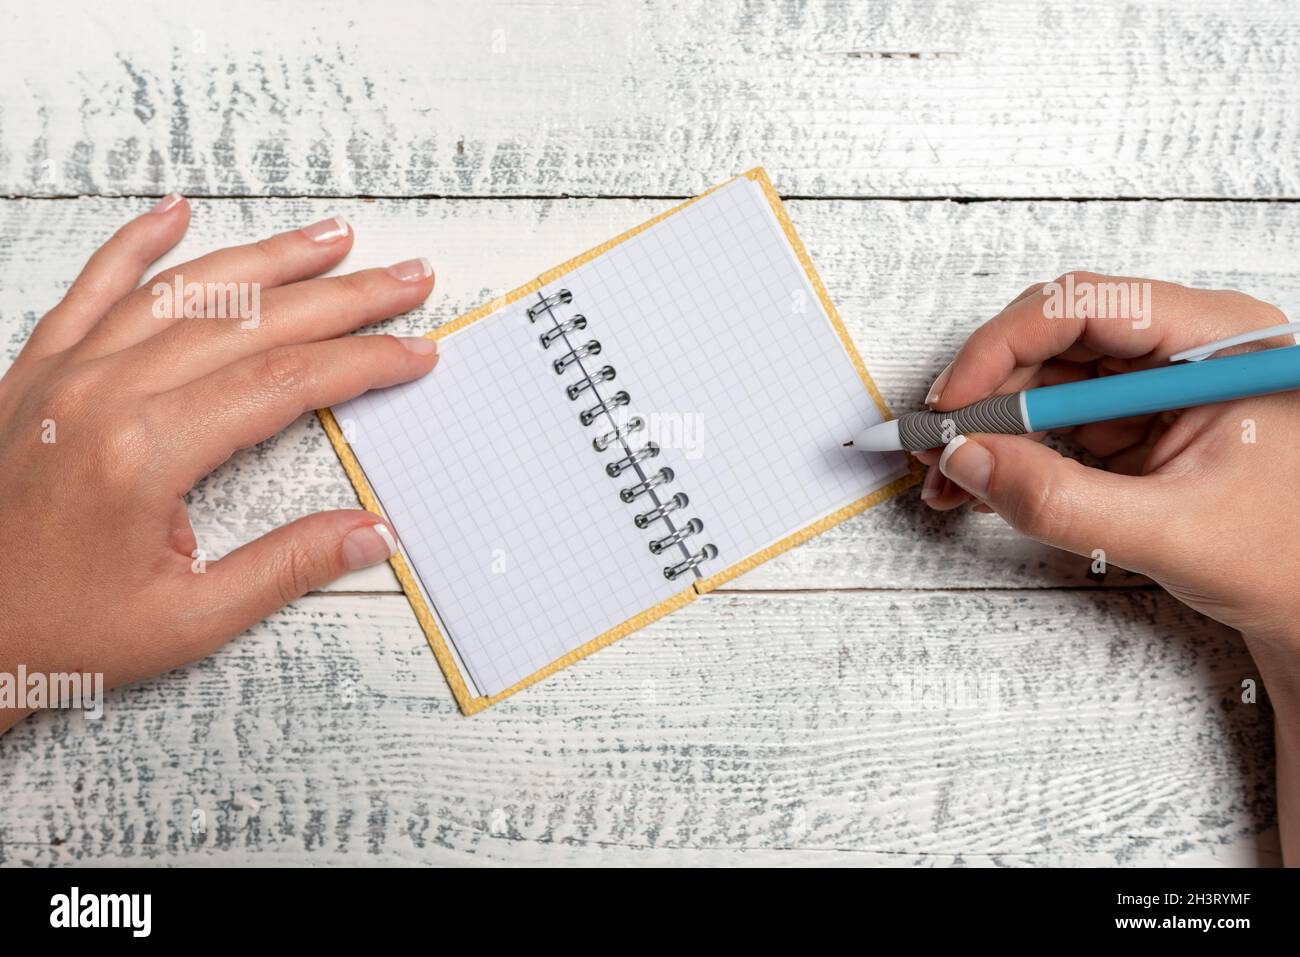 Brainstorming Problems Solutions Ideas Asking Relevant Questions Taking Important Notes Thinking New Idea Breaking Confusion Mys Stock Photo